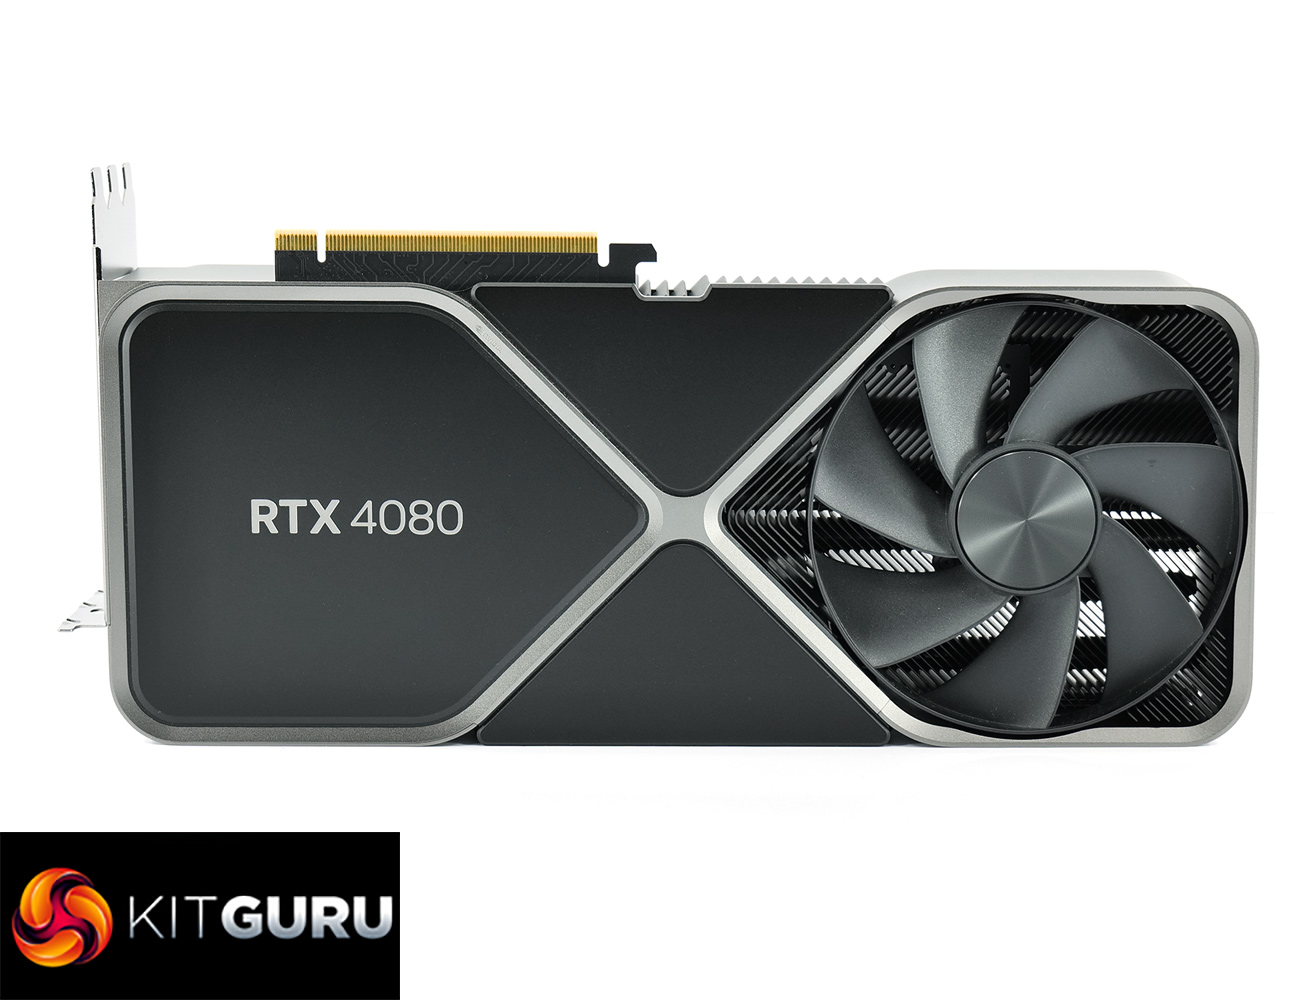 GeForce RTX 4080 SUPER reviews rescheduled to January 31st